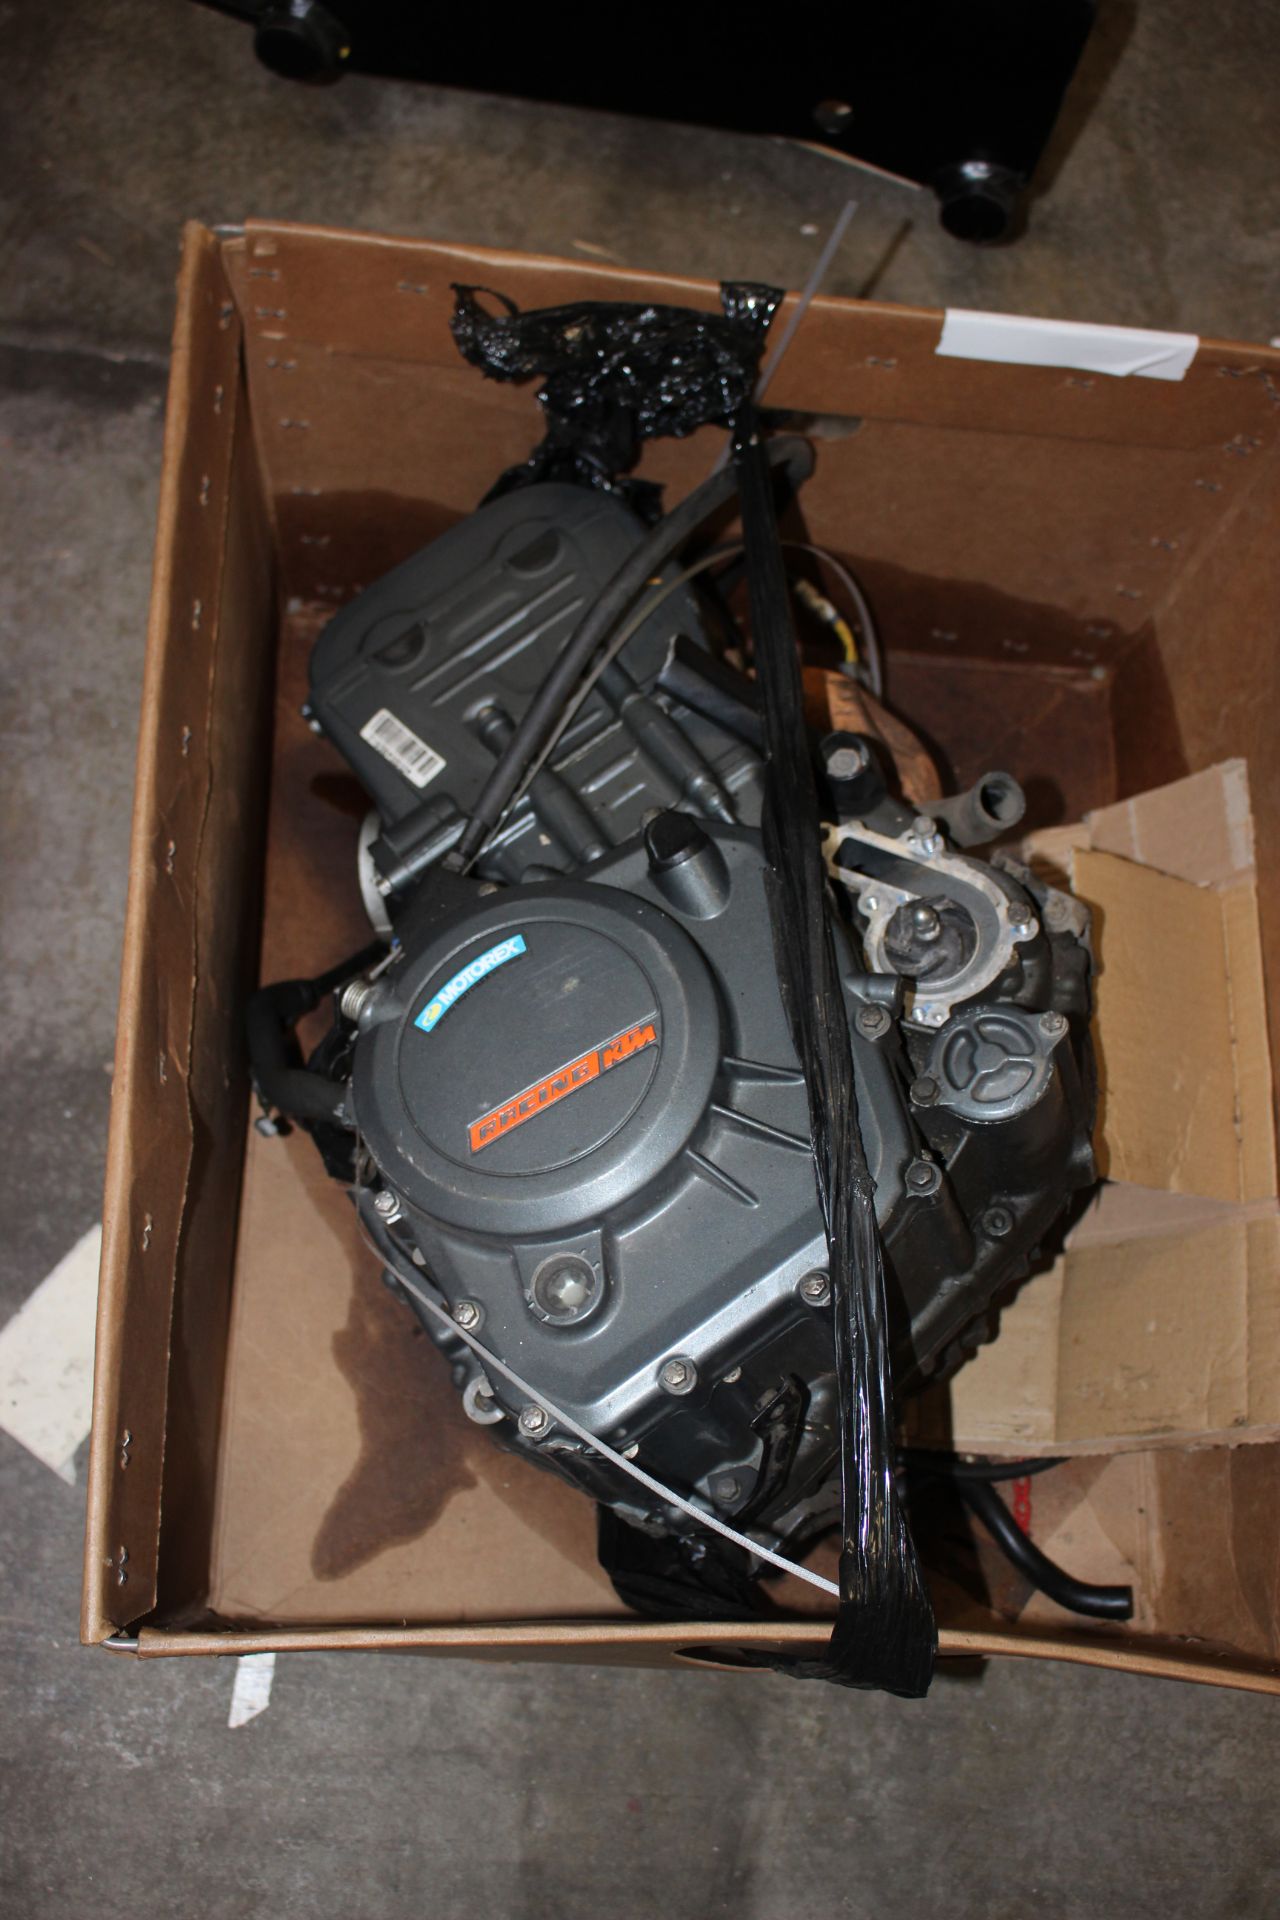 A KTM engine block (Sold as parts).